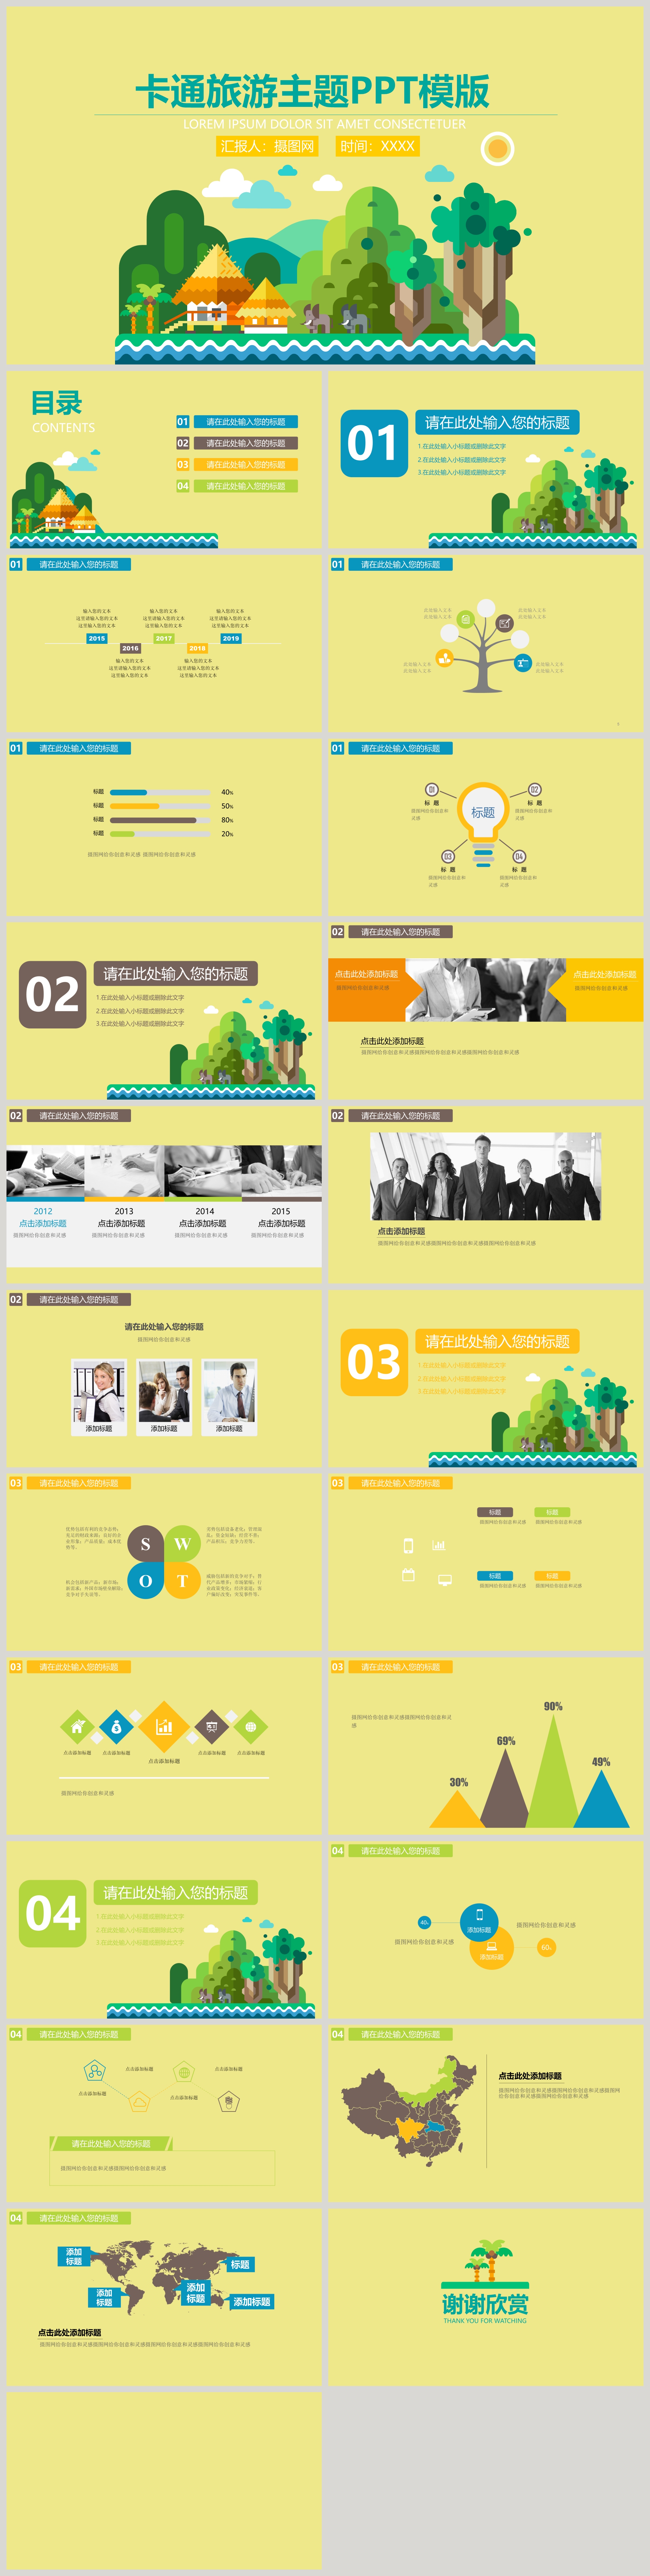 powerpoint animation free download 2012